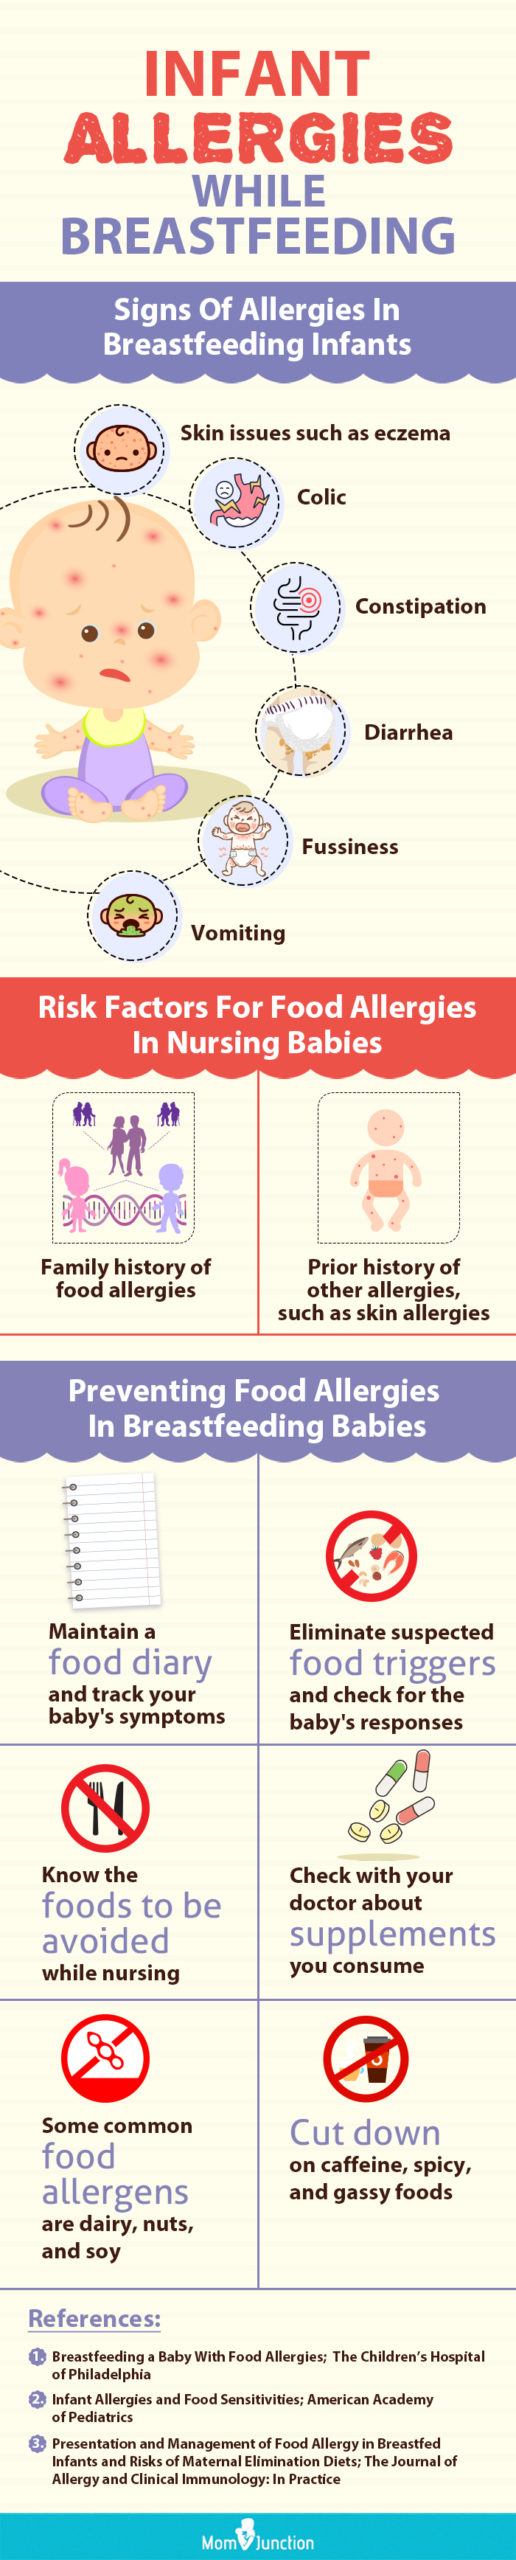 infant allergies while breastfeeding (infographic)